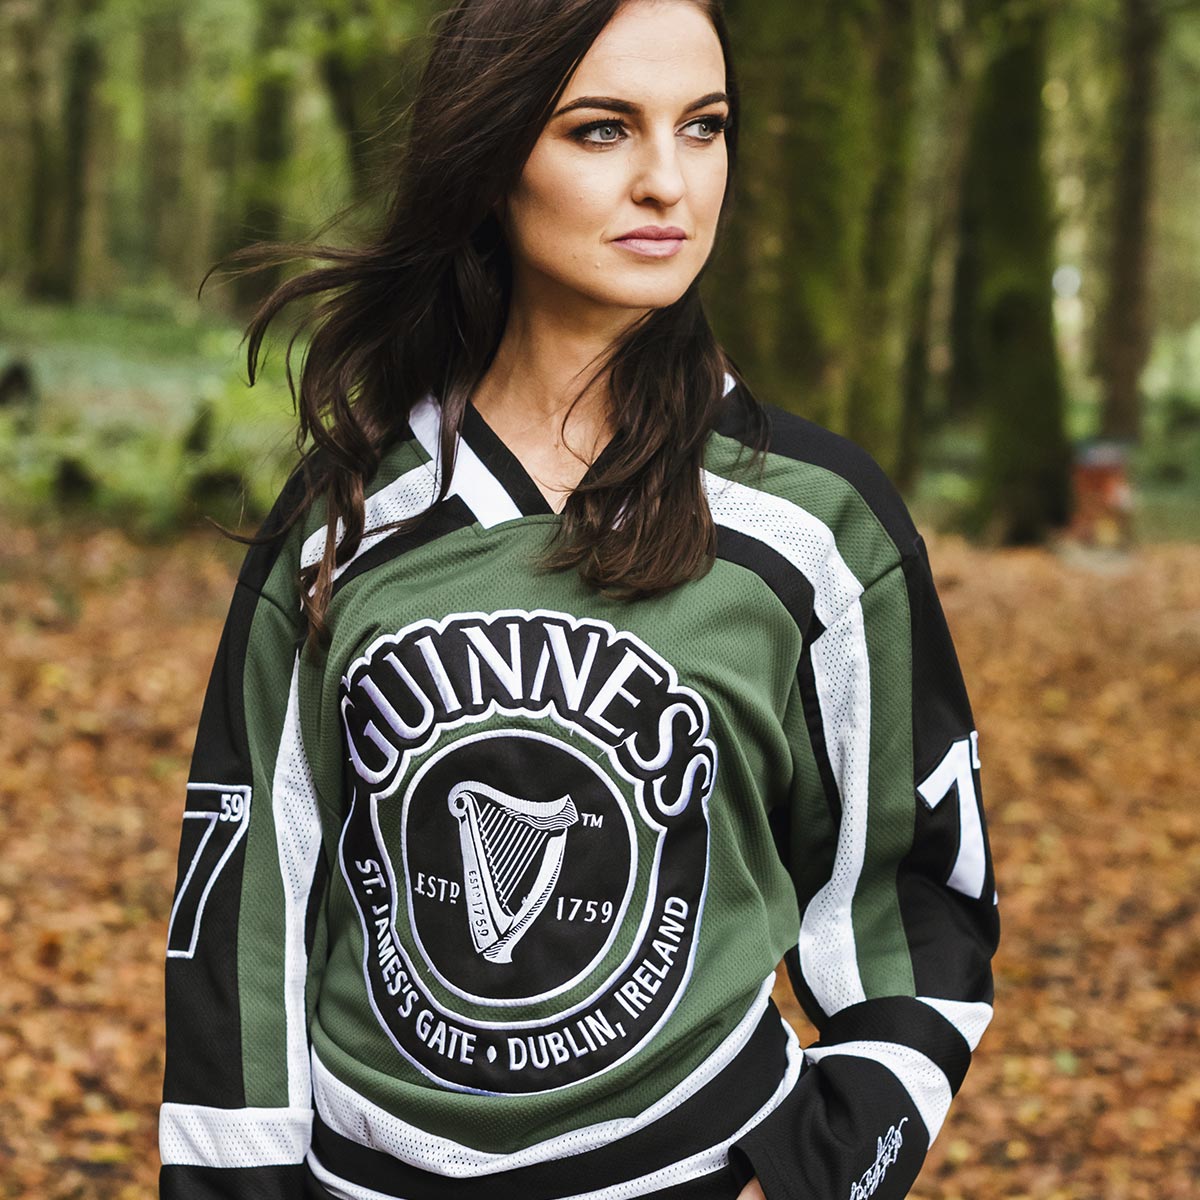 A woman wearing a Guinness UK HARP hockey jersey in the woods.